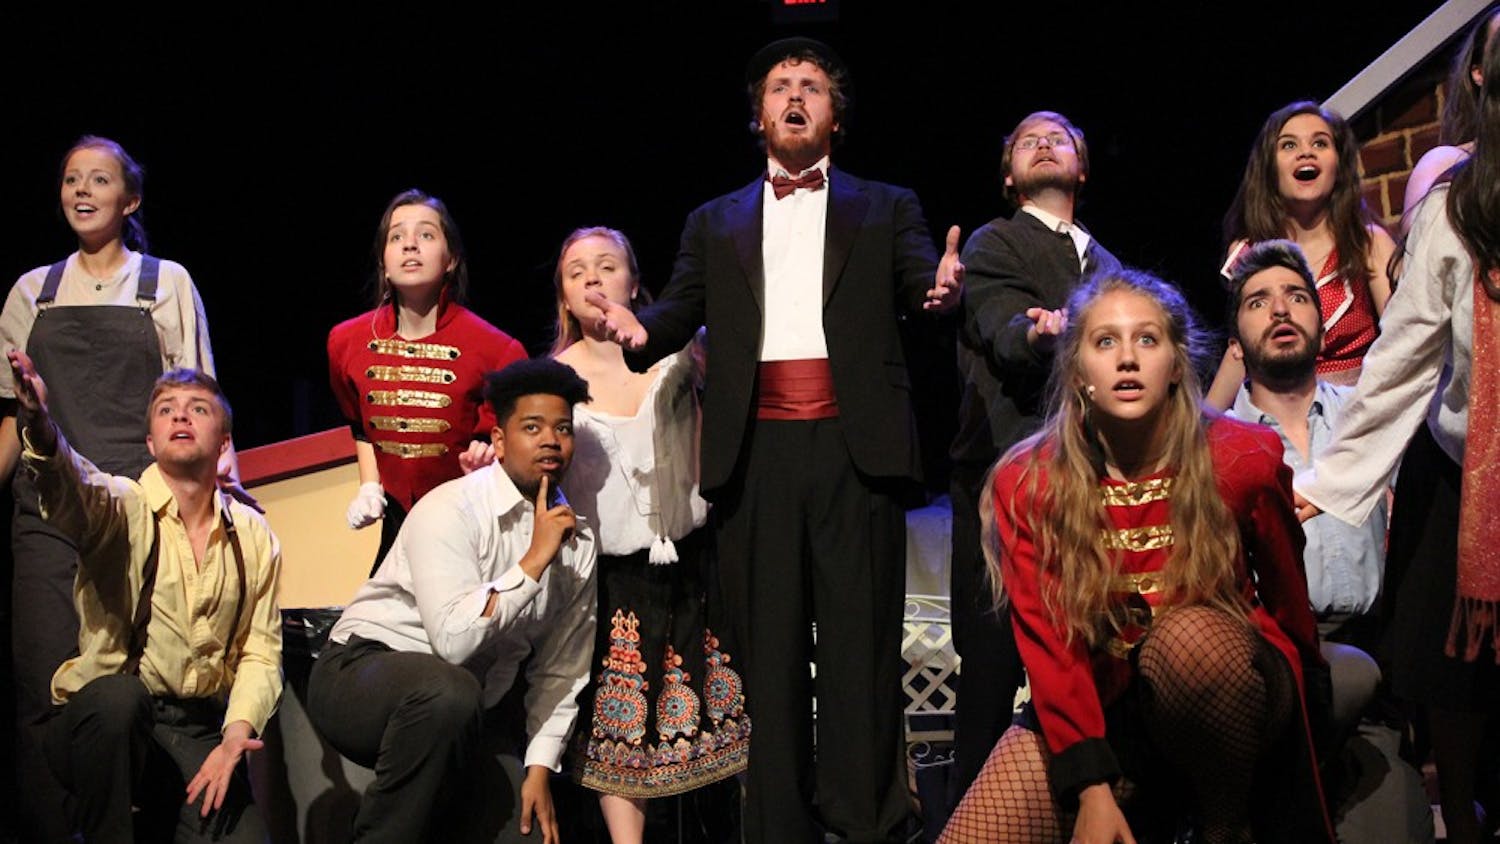 Company Carolina's production of "The Producers" is being held at Historic Playmakers' Theater this weekend.